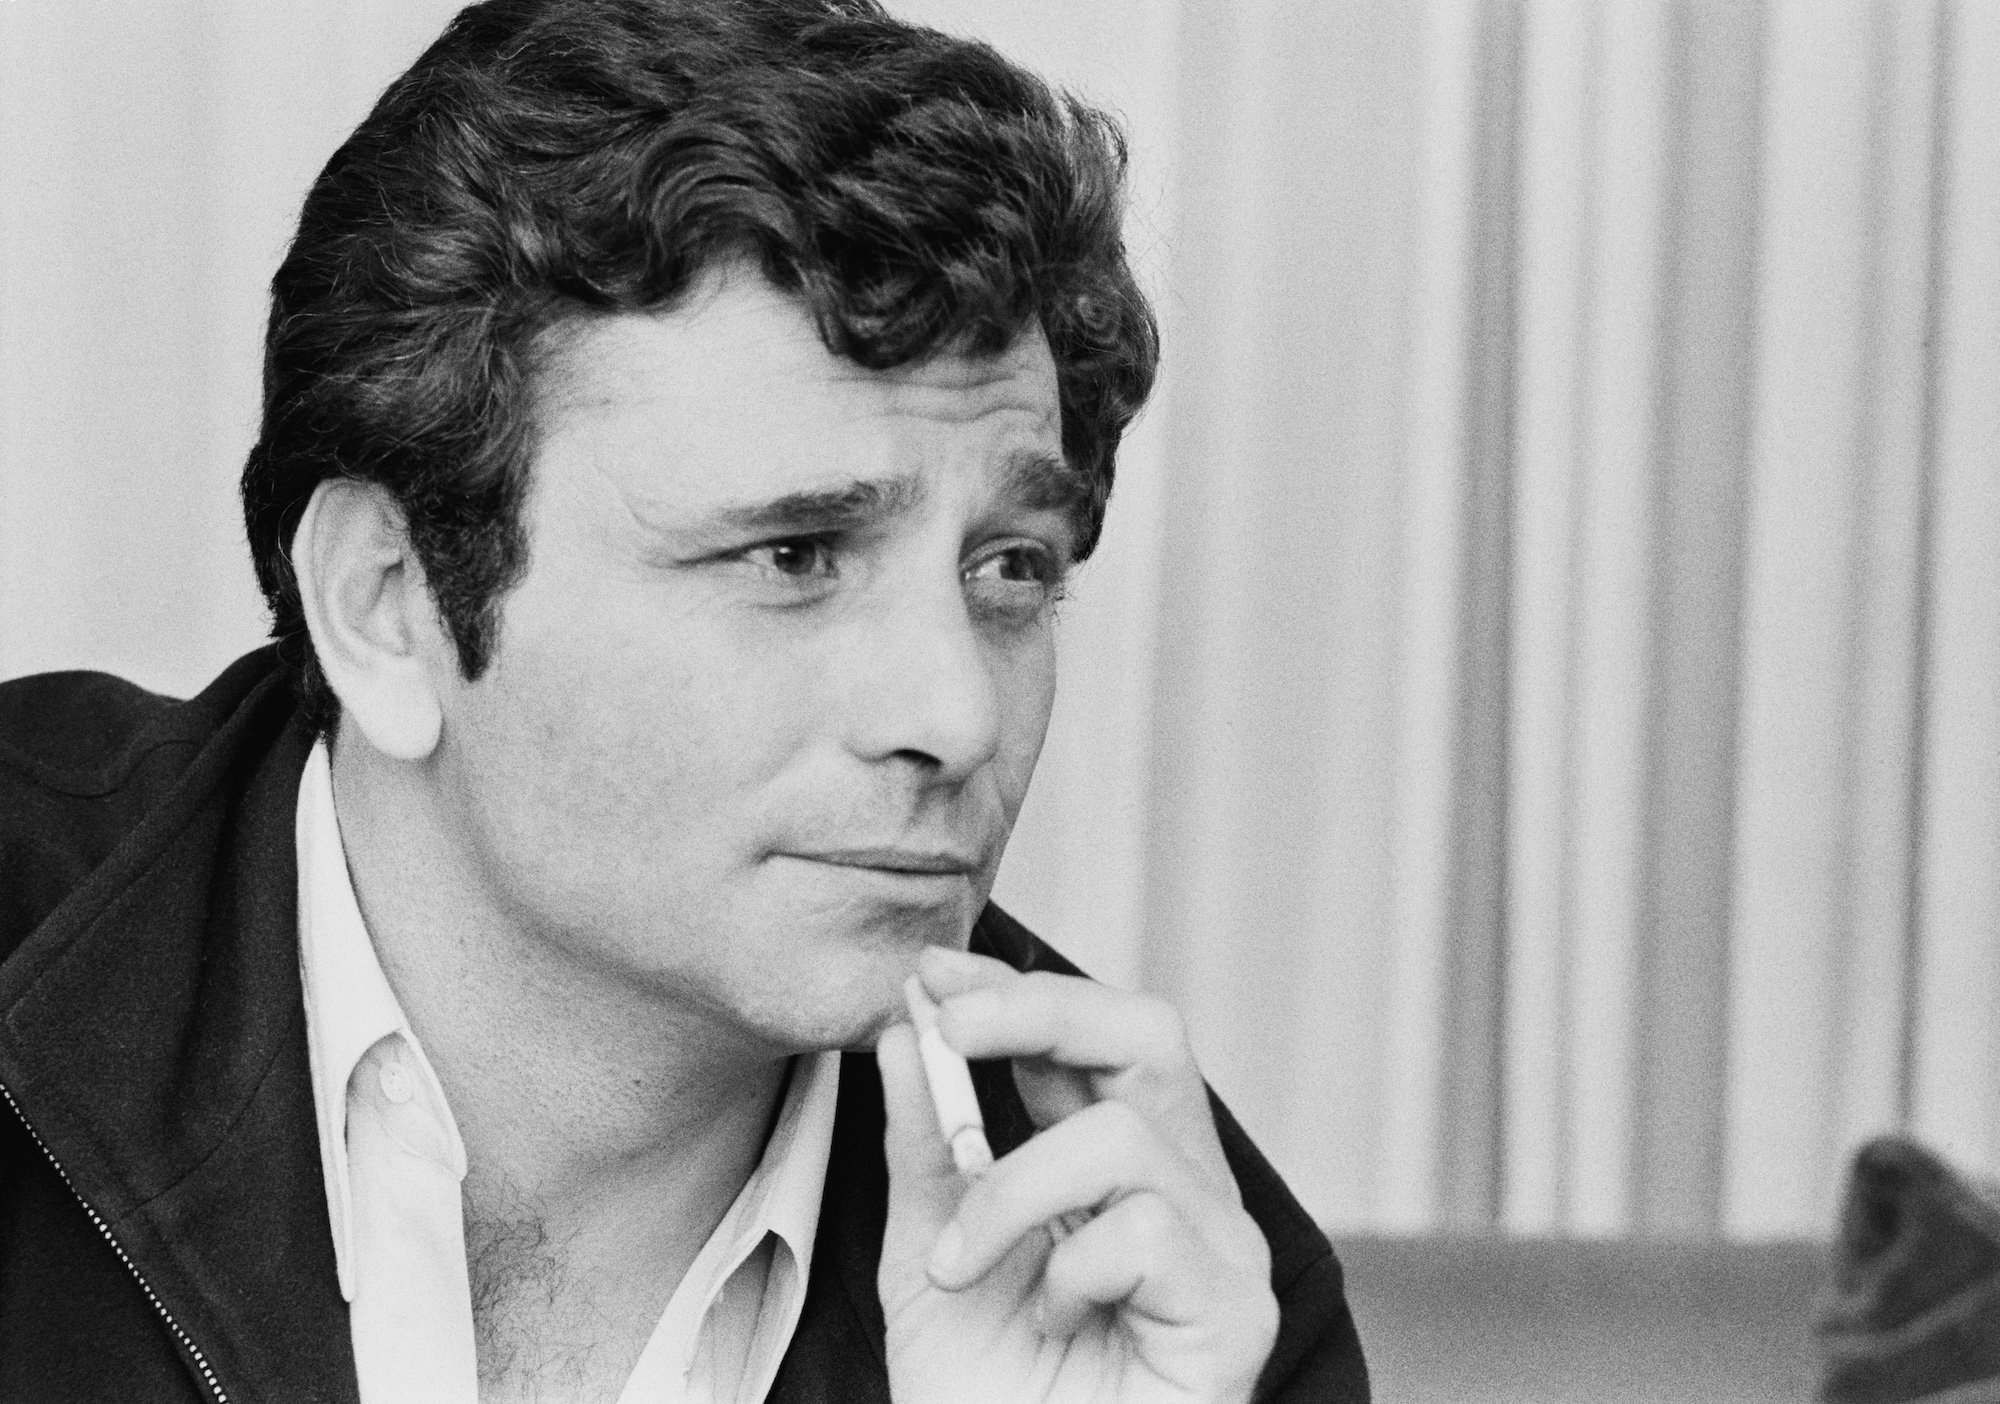 Columbo': No One Actually Expected Peter Falk to Nail the Role So